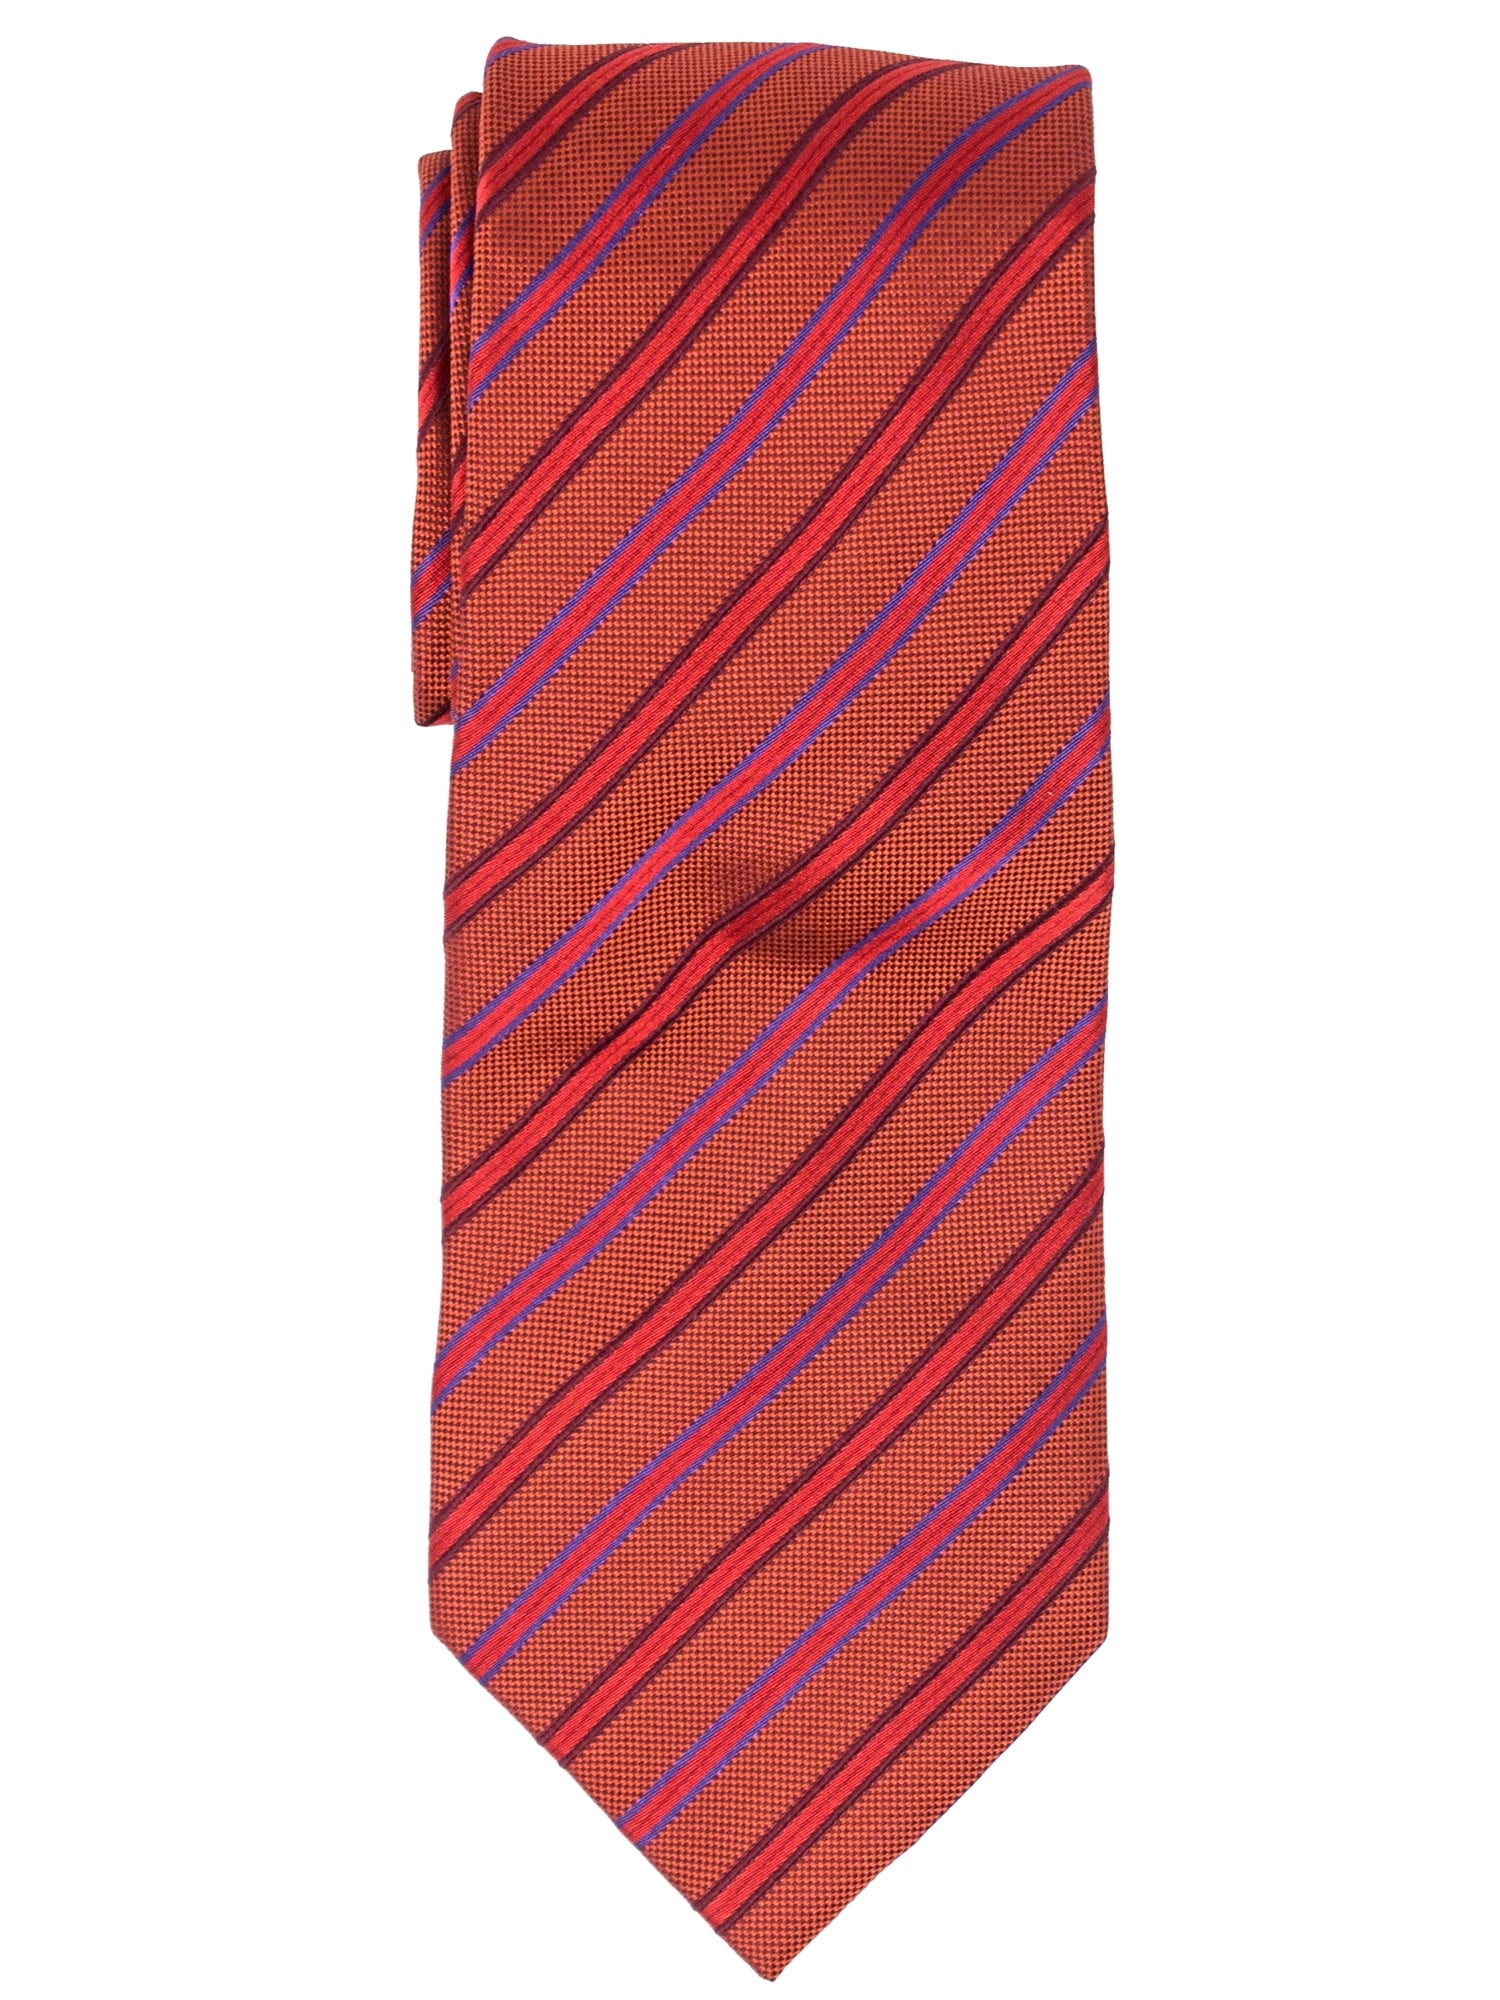 Men's Silk Woven Wedding Neck Tie Collection Neck Tie TheDapperTie Red, Royal Blue And Black Stripes Regular 